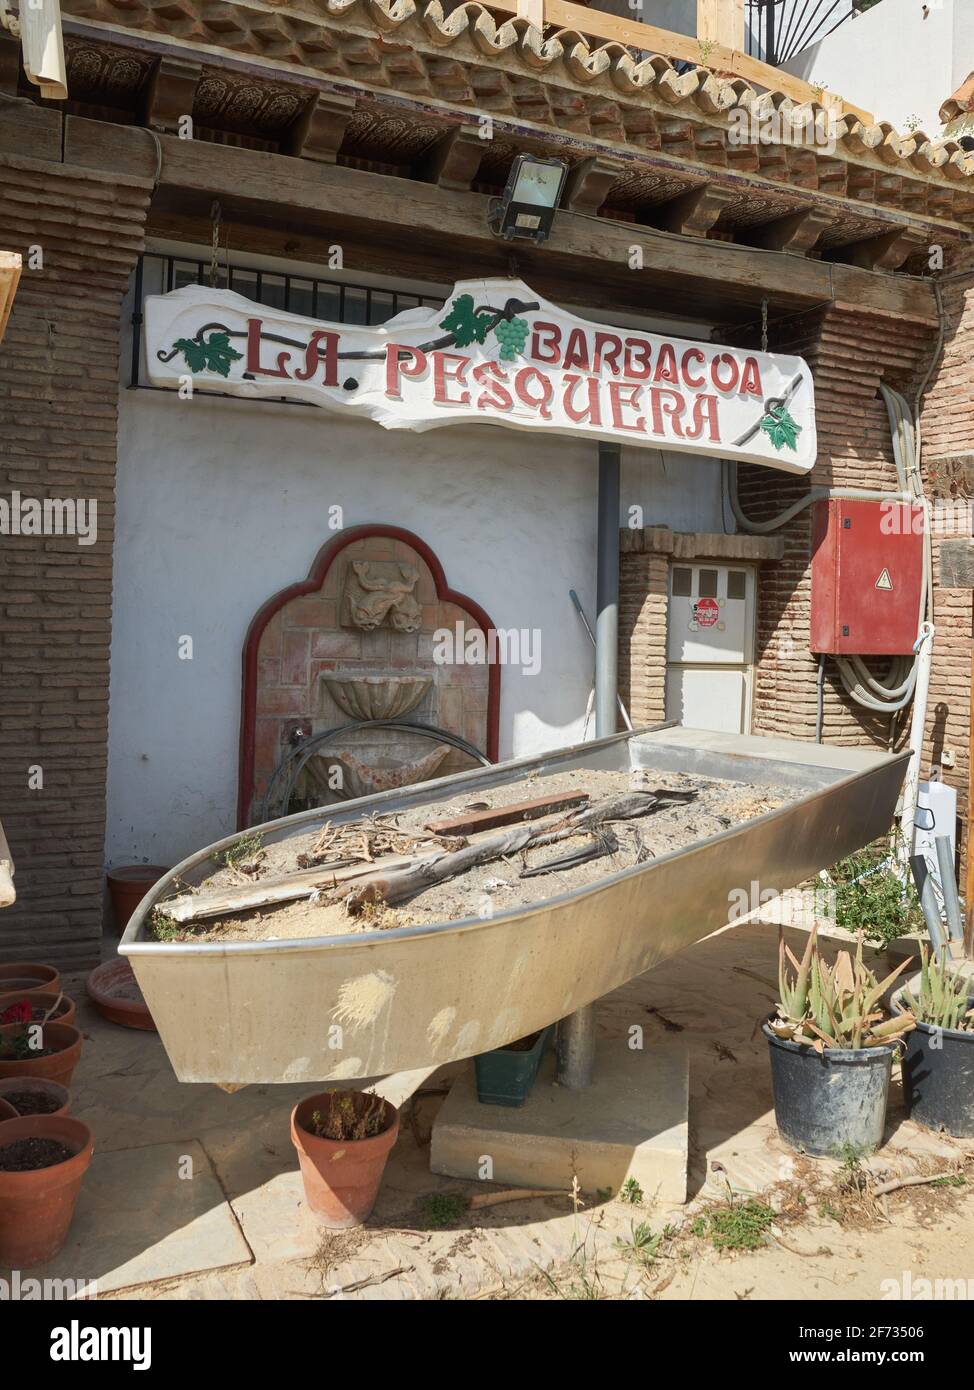 Stainless steell boat barbacue to grill sardines (espetos). La Pesquera  restaurant, Marbella, Malaga province, Andalusia, Spain Stock Photo - Alamy